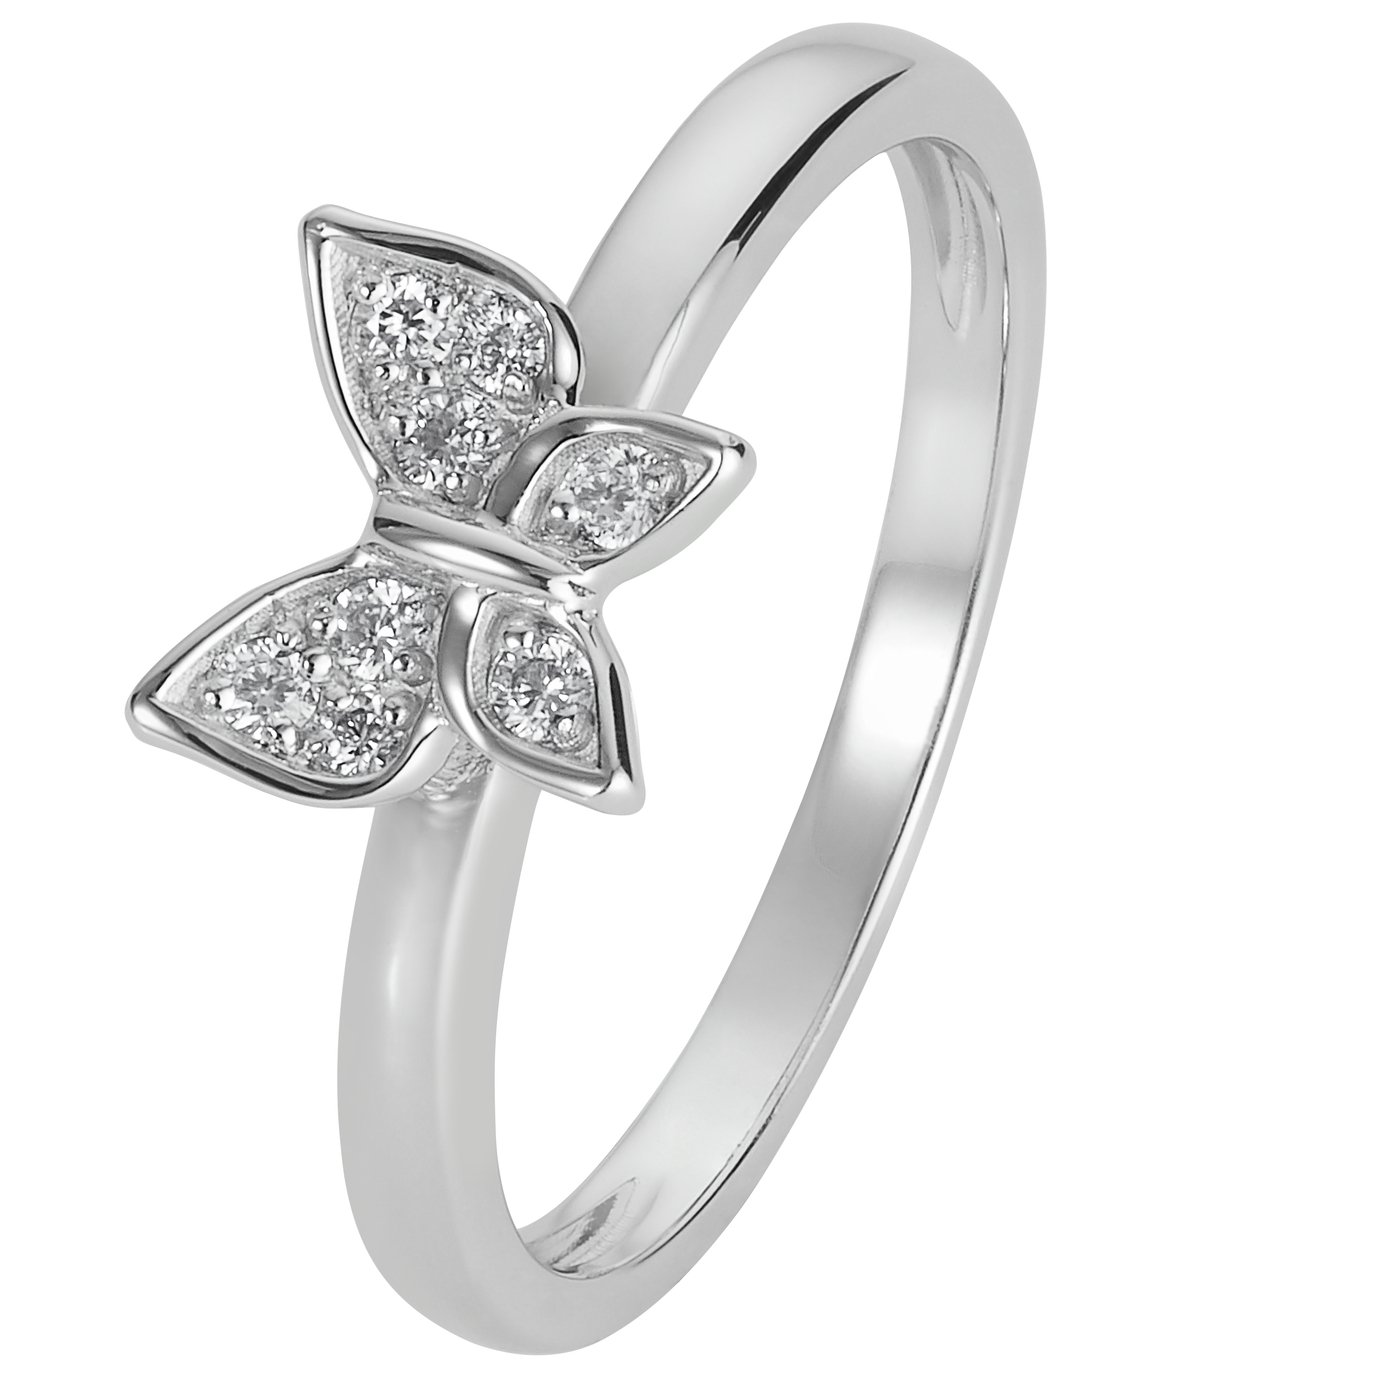 where to buy sterling silver rings